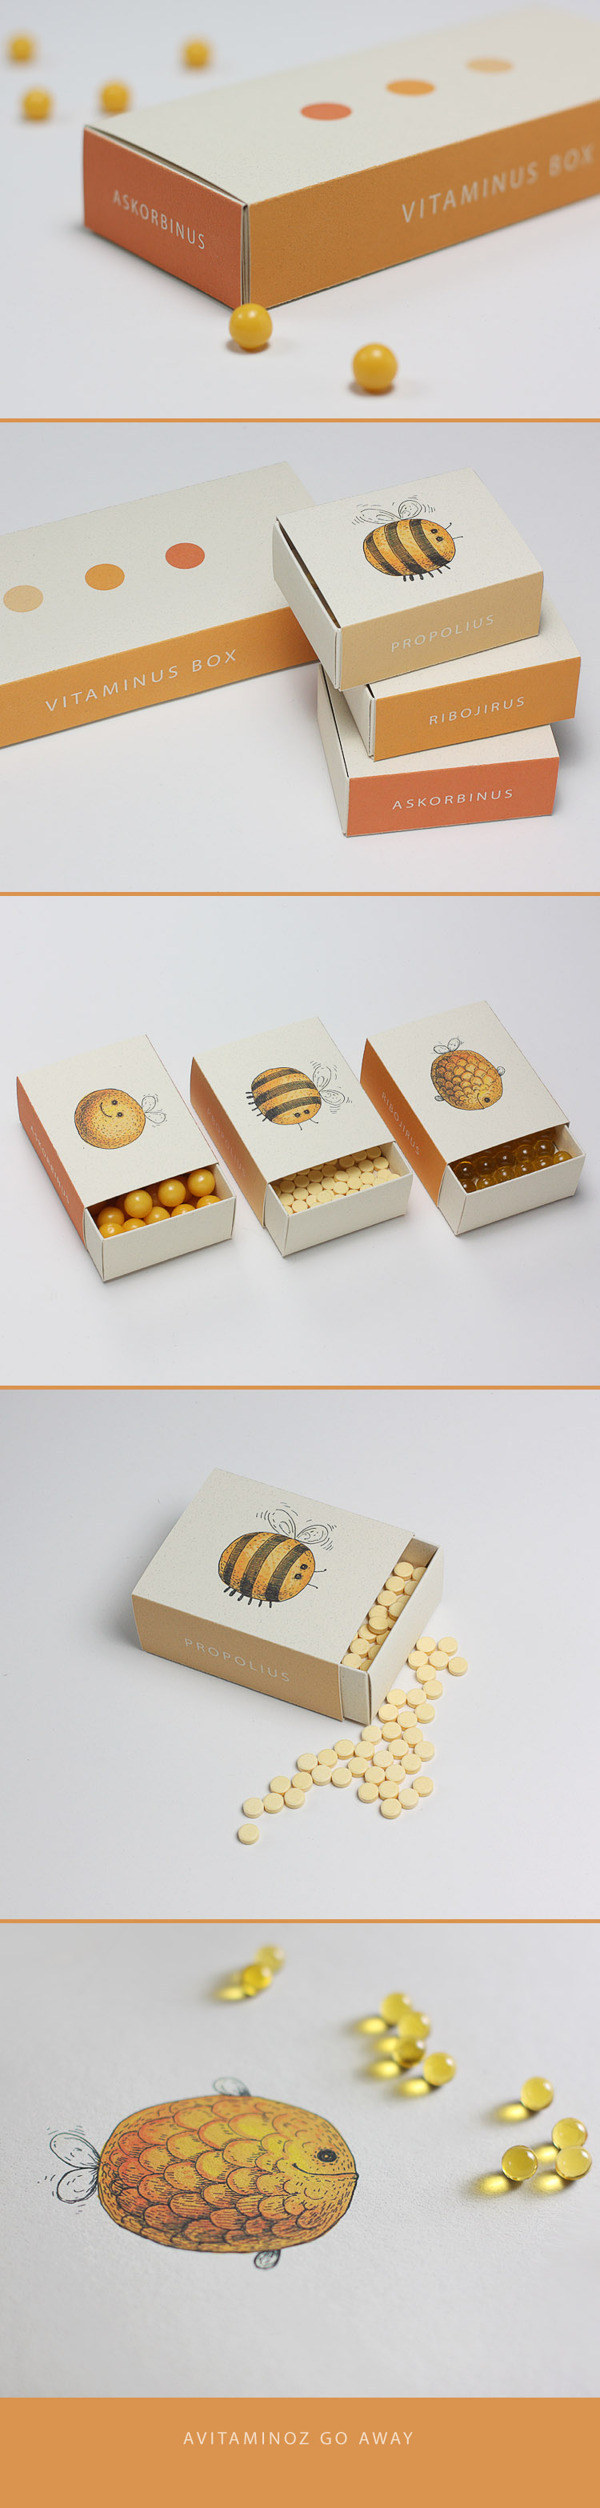 The cutest vitamin boxes imaginable.